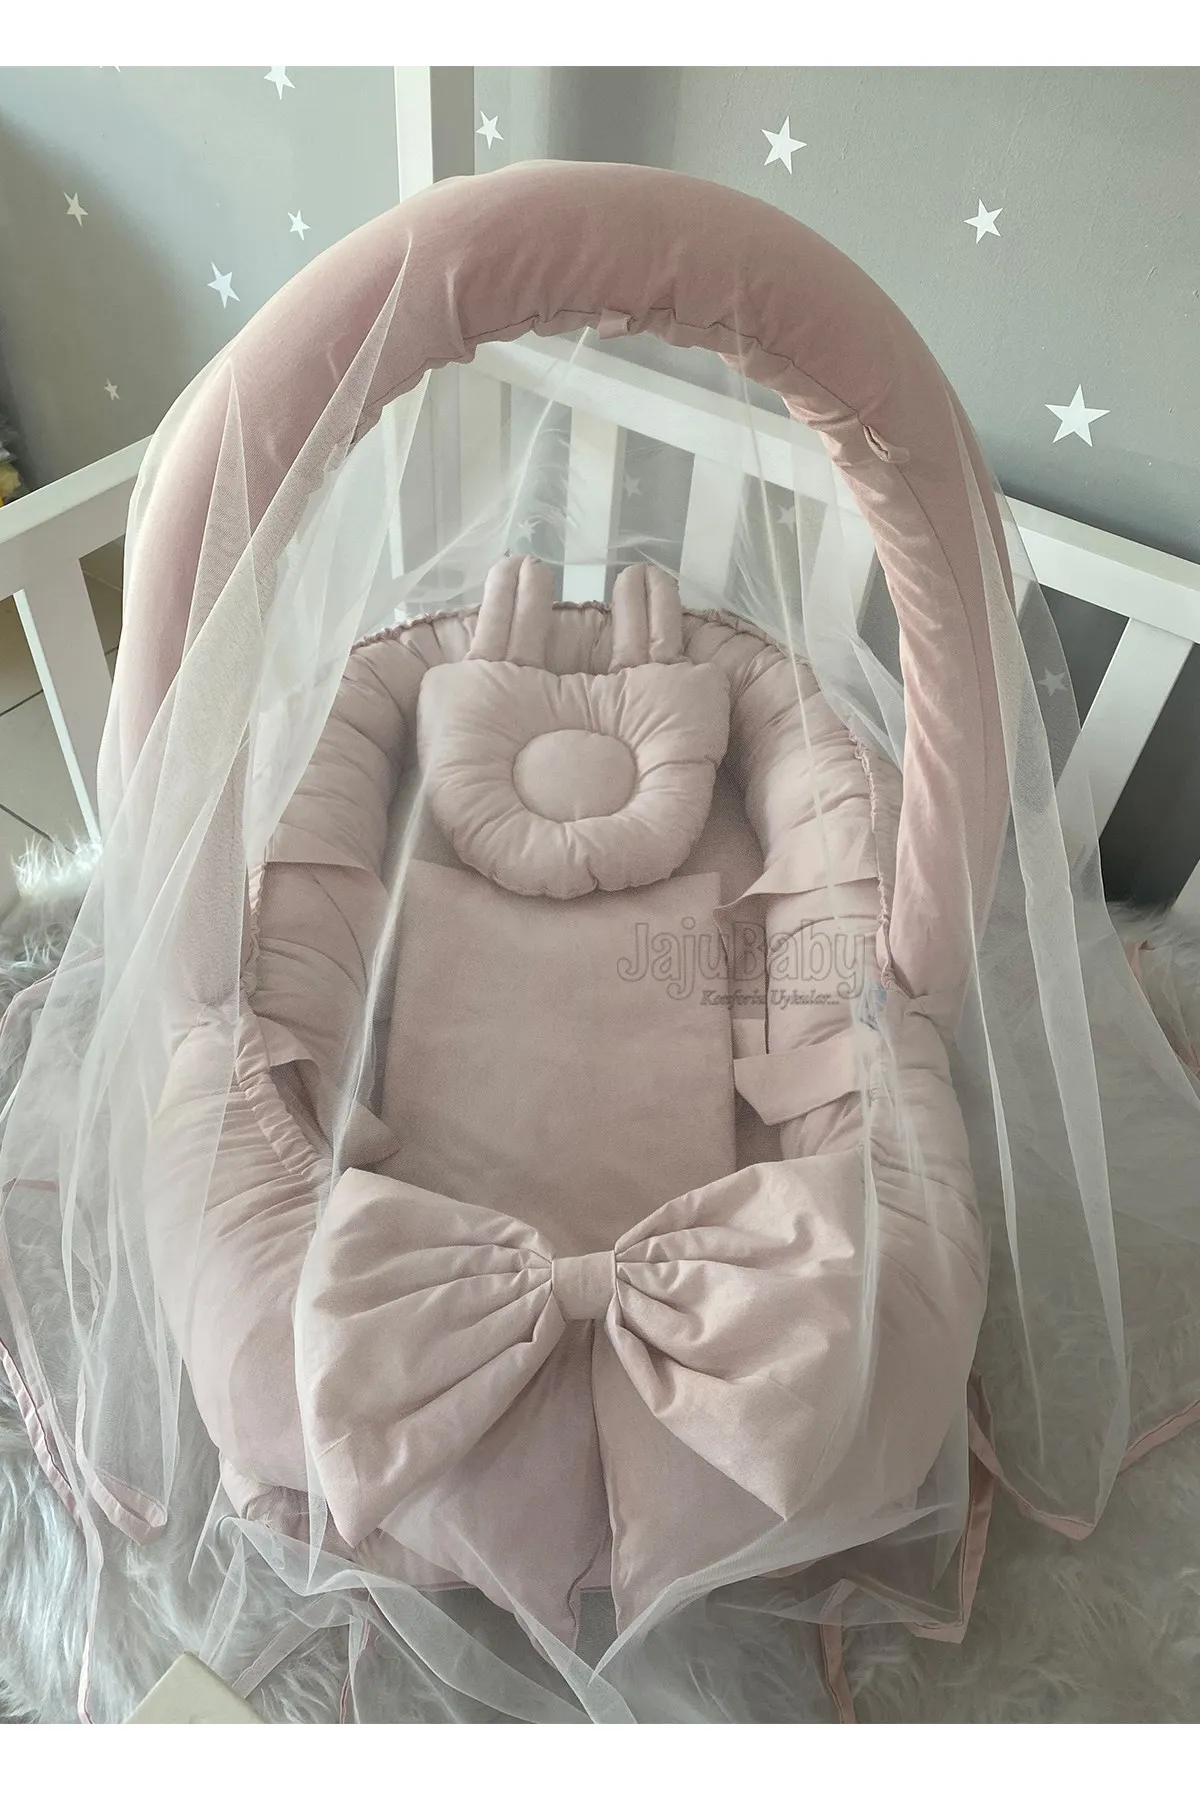 Babynest Pudra Design Mother's Bed with Mosquito Net and Toy Hanger Baby Nest